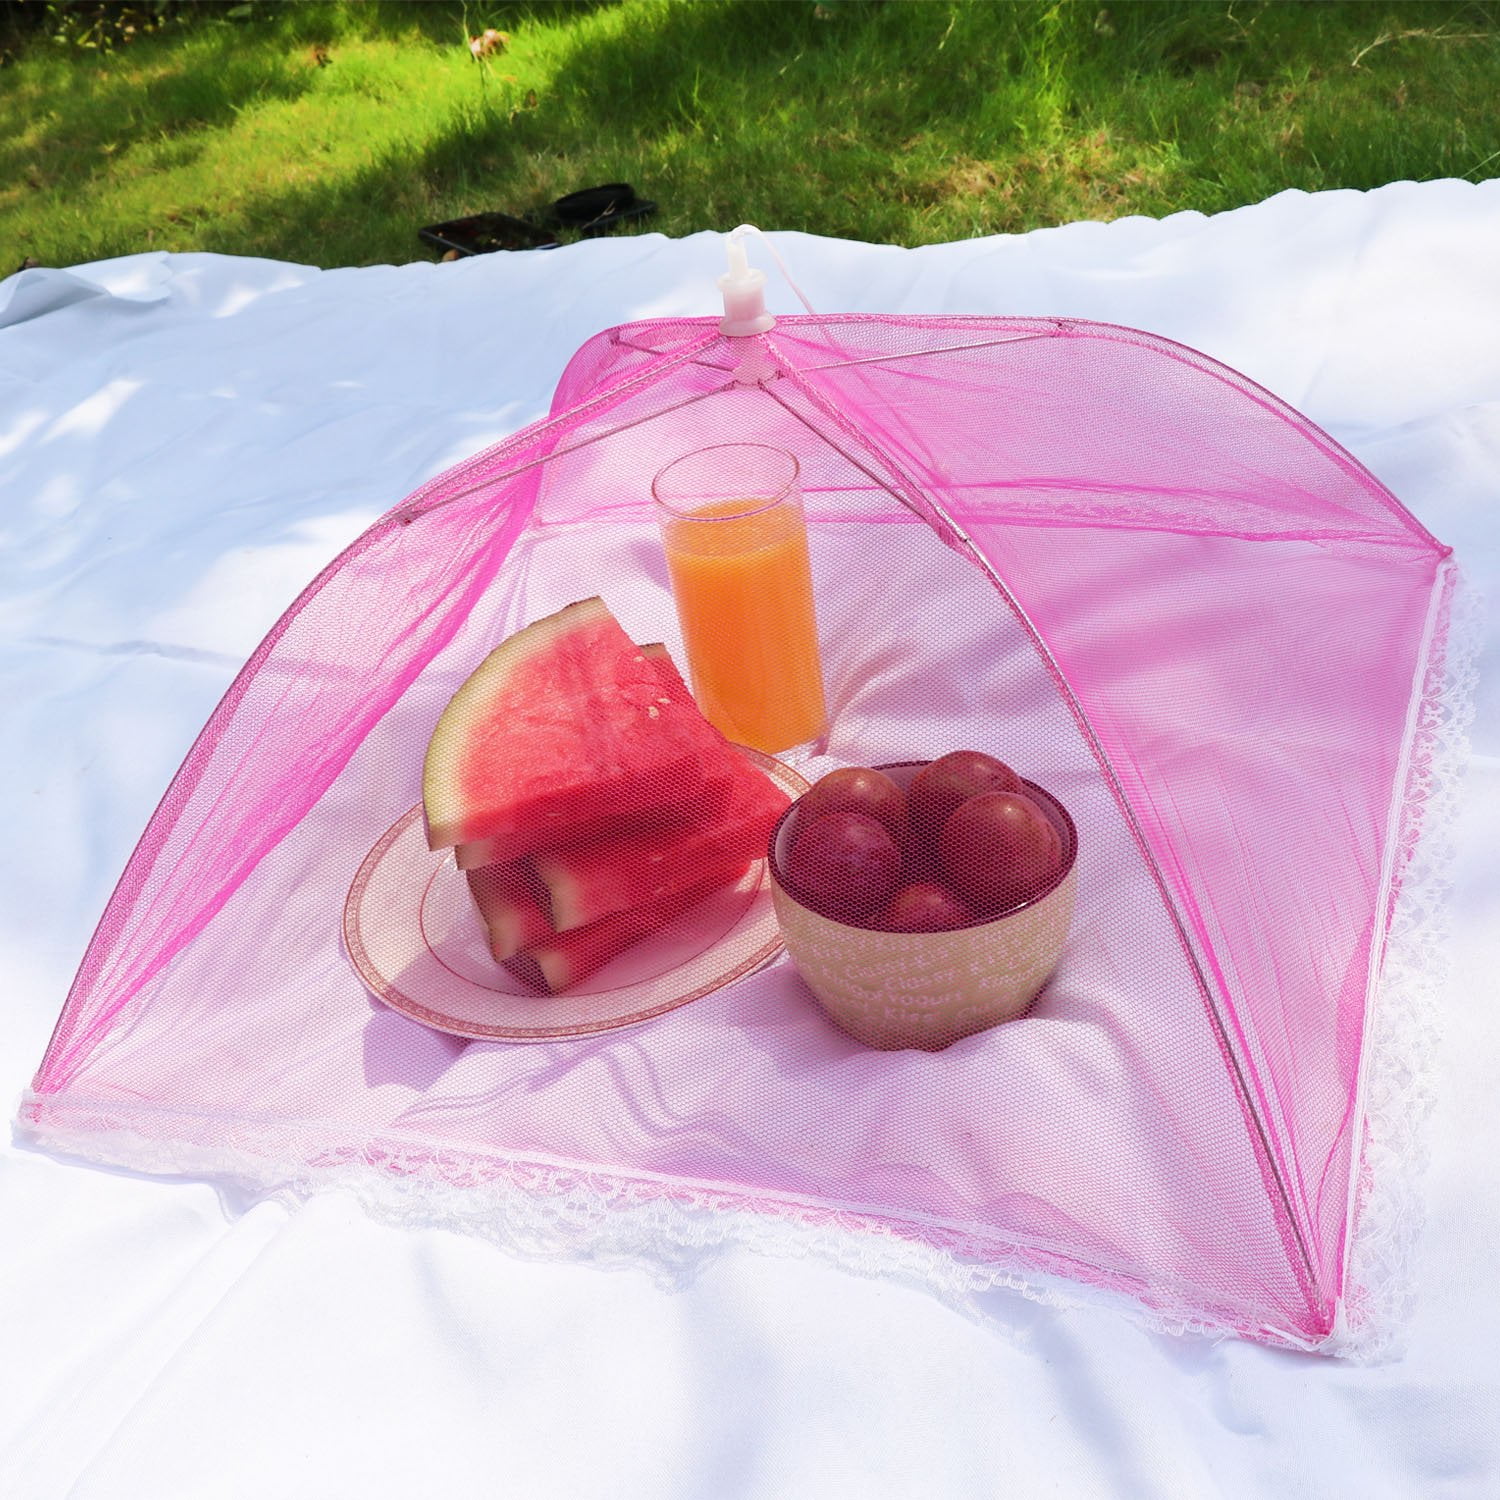 DOITOOL 3pcs Mesh Screen Food Covers Tent Kitchen Anti- Bug Food Covers  Plate Dish Nets Plastic Food Cover Dome Umbrellas Picnic Covers Keep Out  Flies